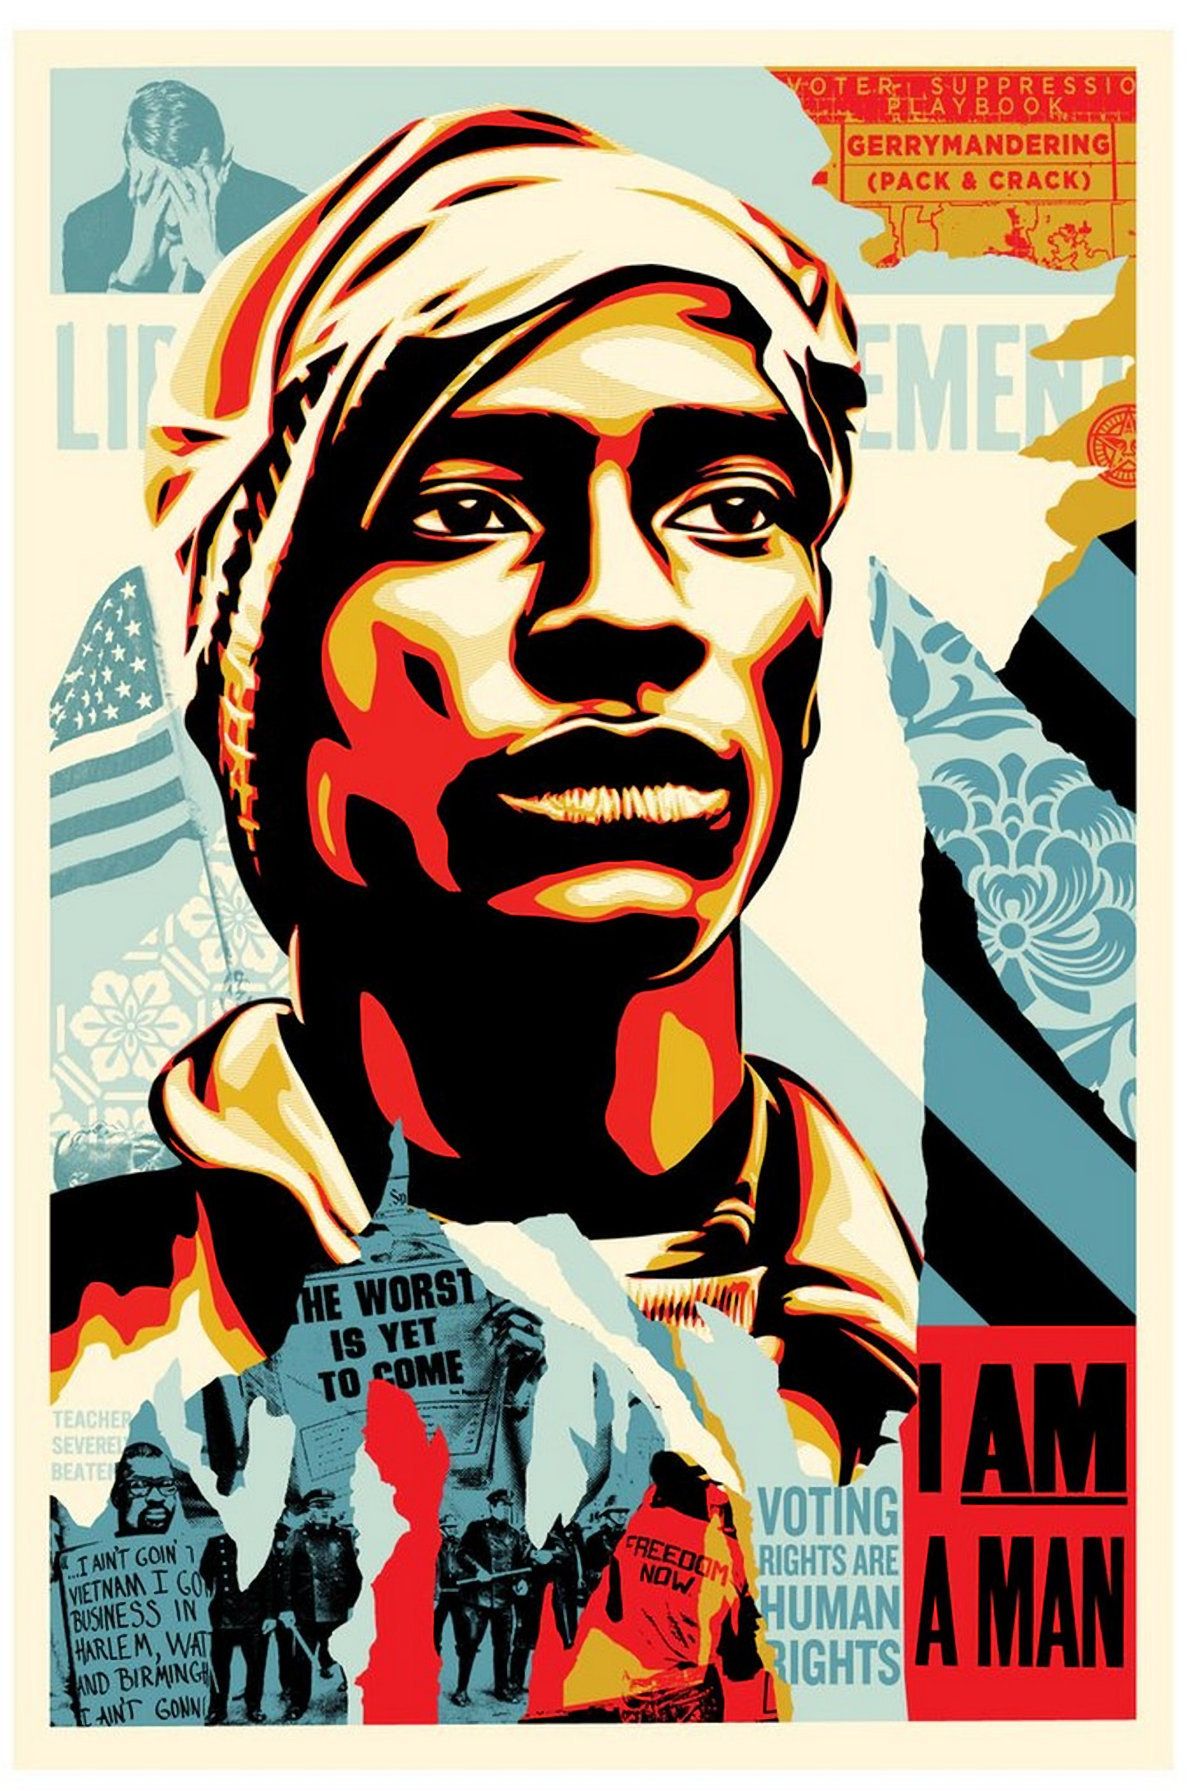 Shepard FAIREY Shepard FAIREY (Obey)

Voting rights are human rights

Offset lit&hellip;